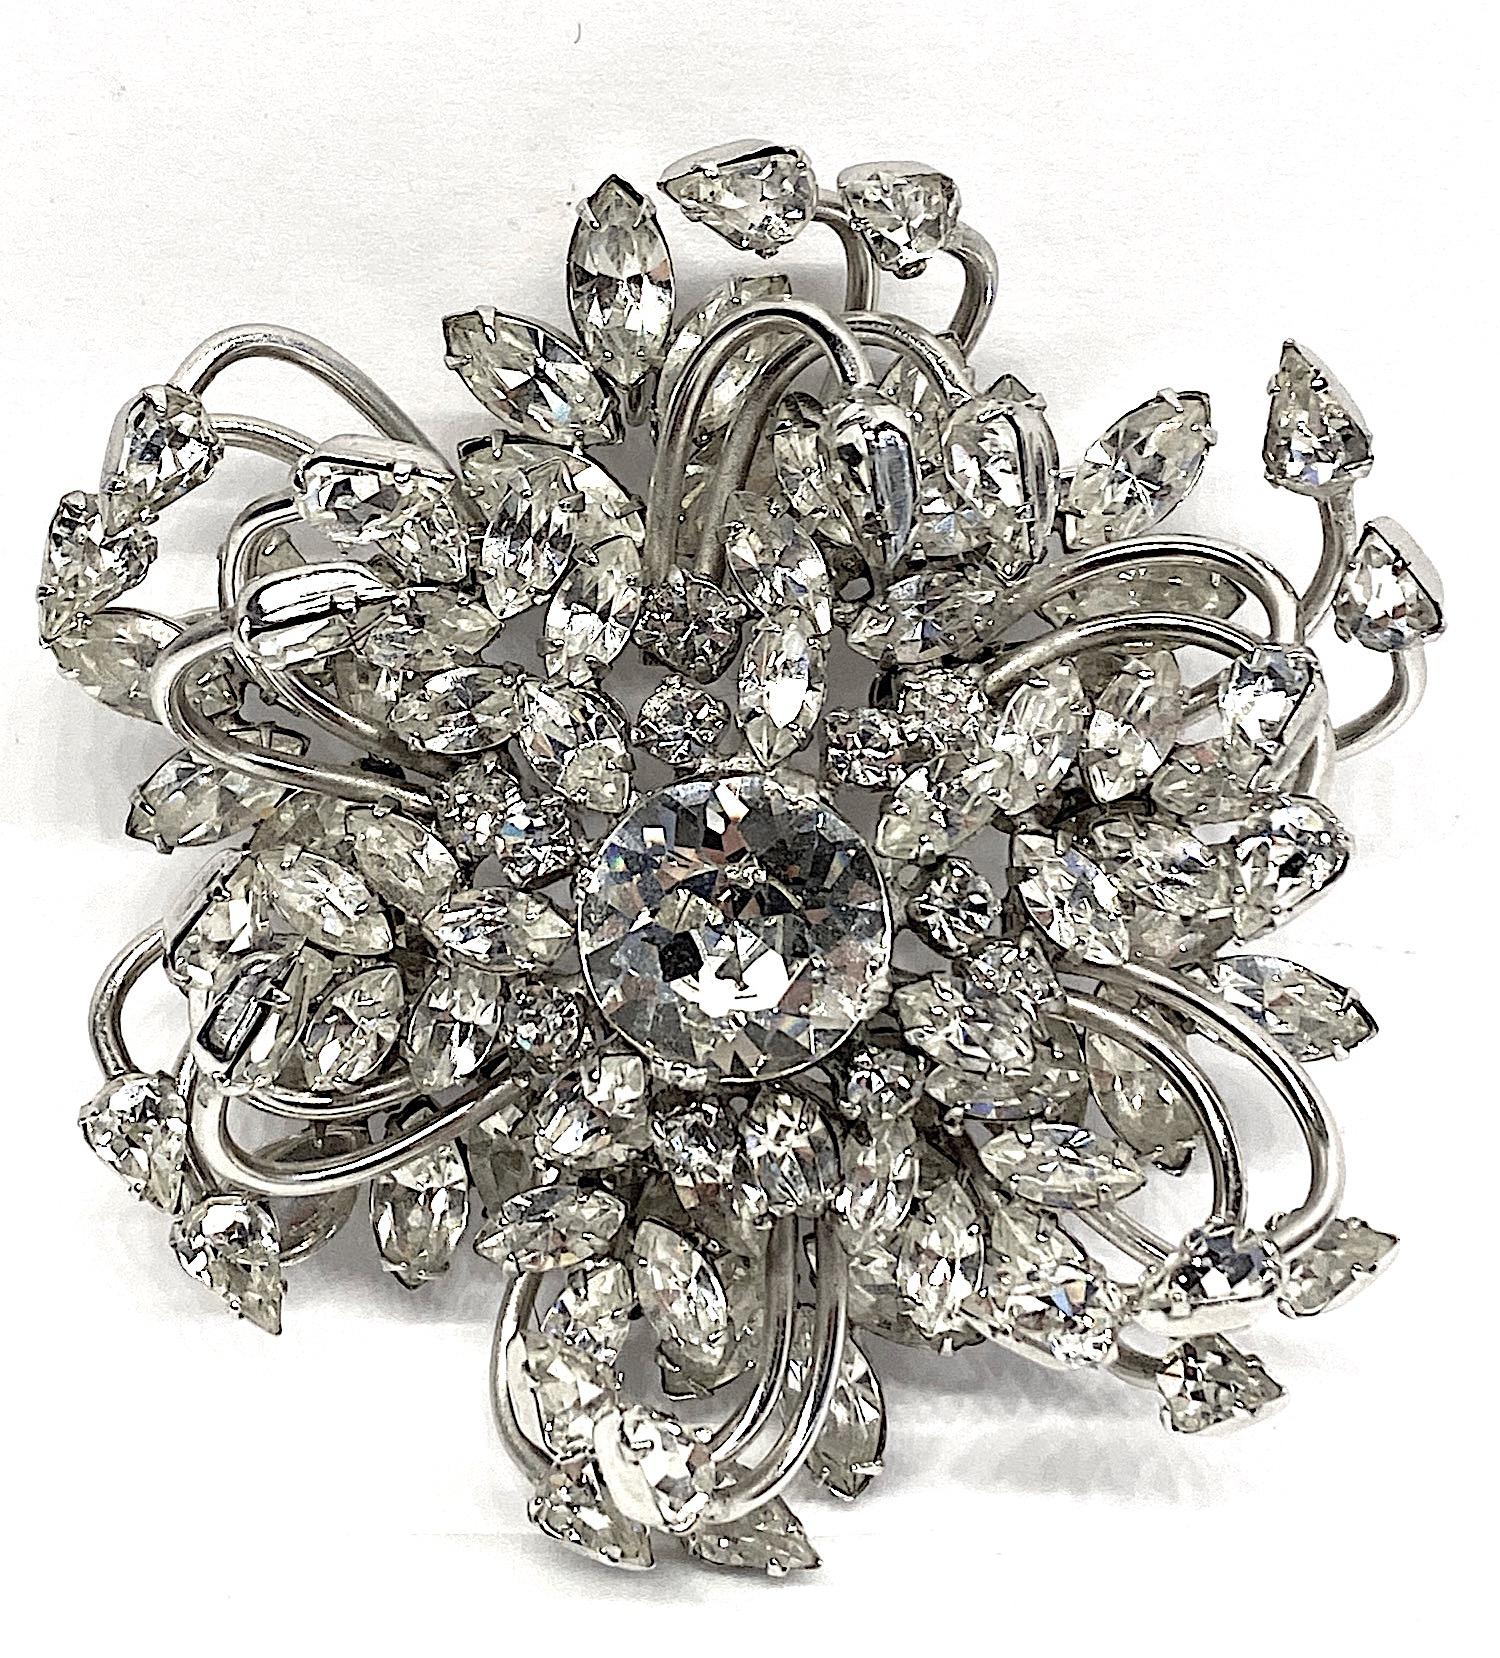 A beautifully hand made and constructed large three dimensional flower brooch from the 1950s by company Original by Robert. The large central 14 mm rhinestone is surrounded by smaller round and marquise stones. This in turn is mounted upon six petal